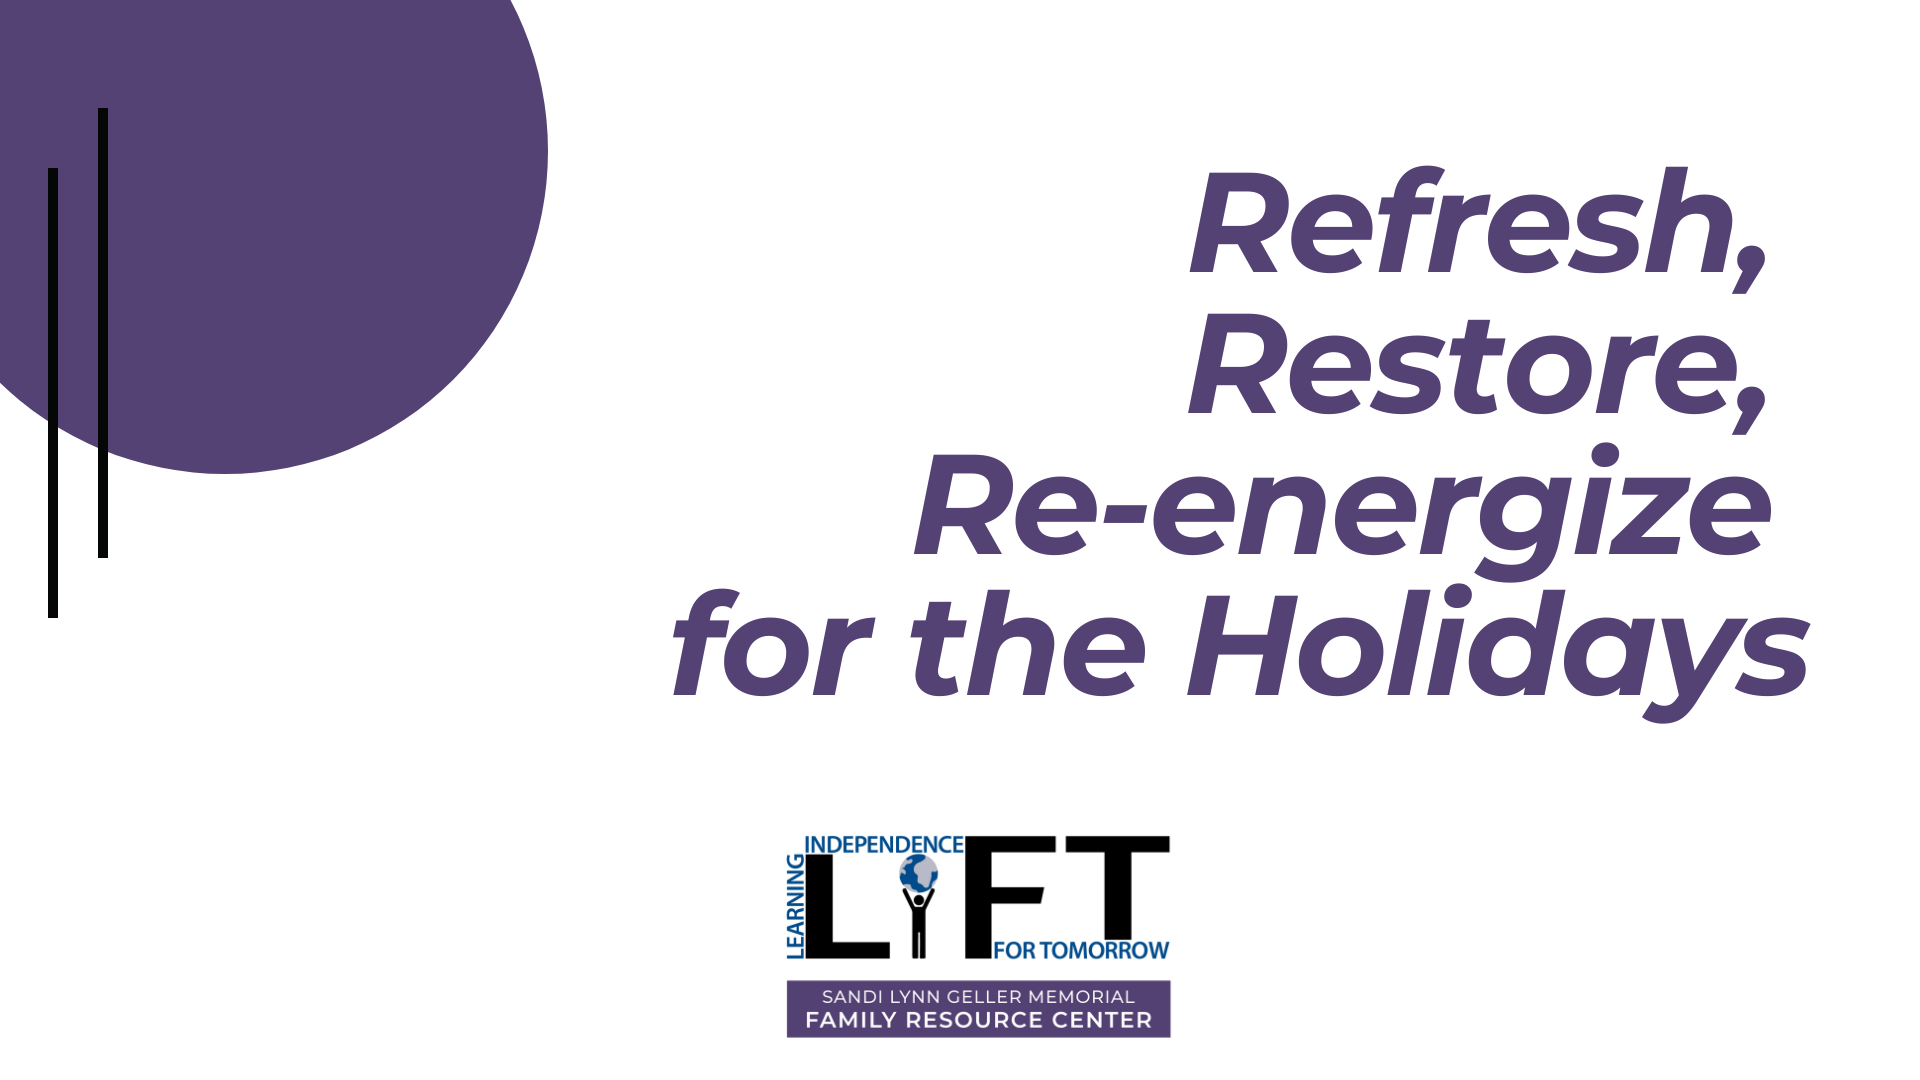 Refresh, Restore, and Re-energize for the Holidays